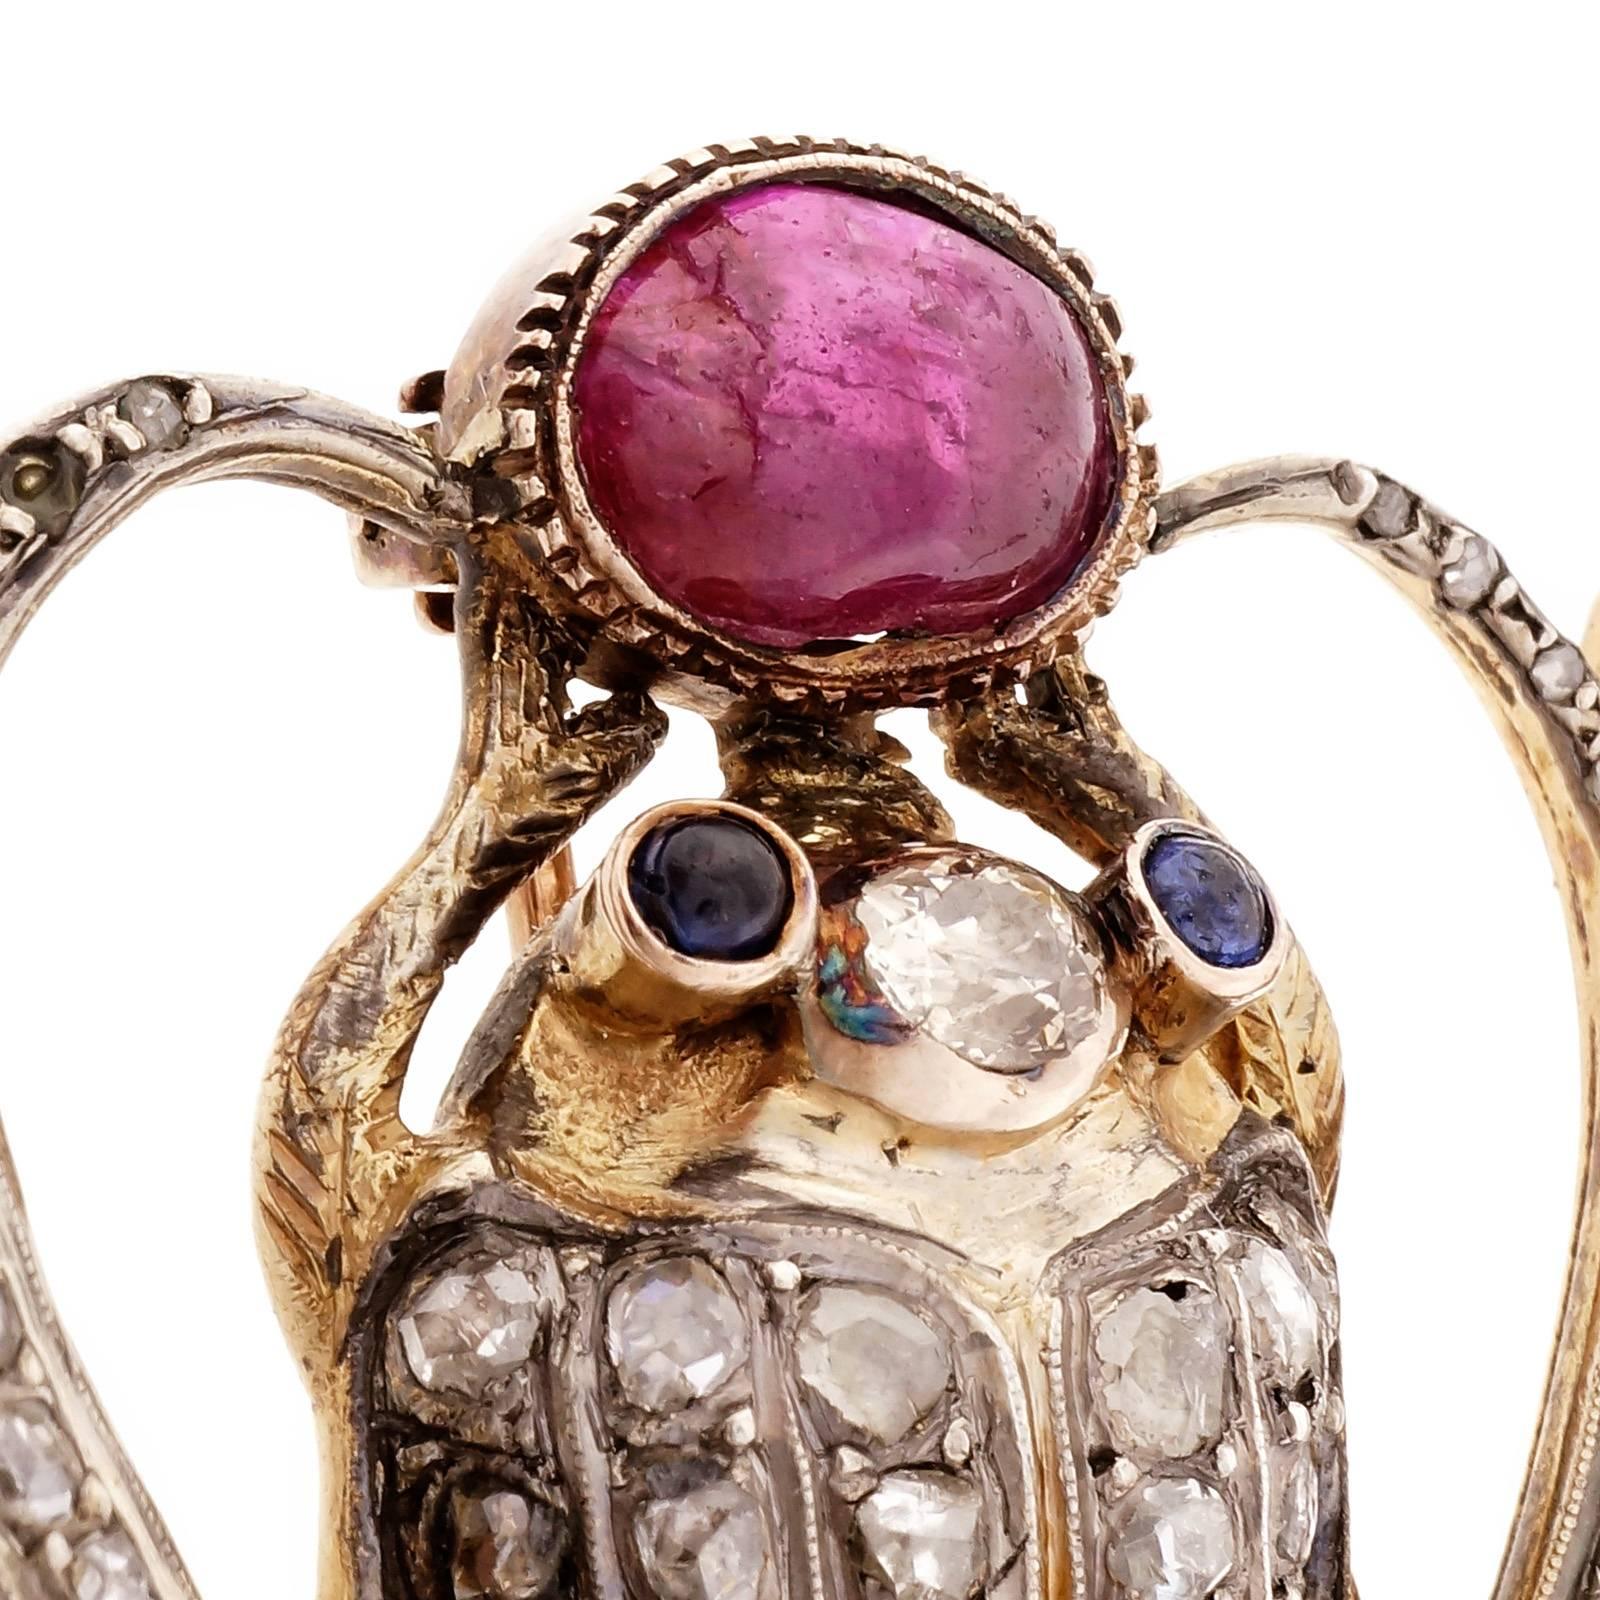 1920-1930 Egyptian Revival silver and gold pin with genuine ruby and Sapphire accents. Rose cut and old mine cut diamonds and a GIA certified natural saltwater pearl. 14k hinge and 10k pin stem.

1 old mine diamond, approx. total weight .25cts,